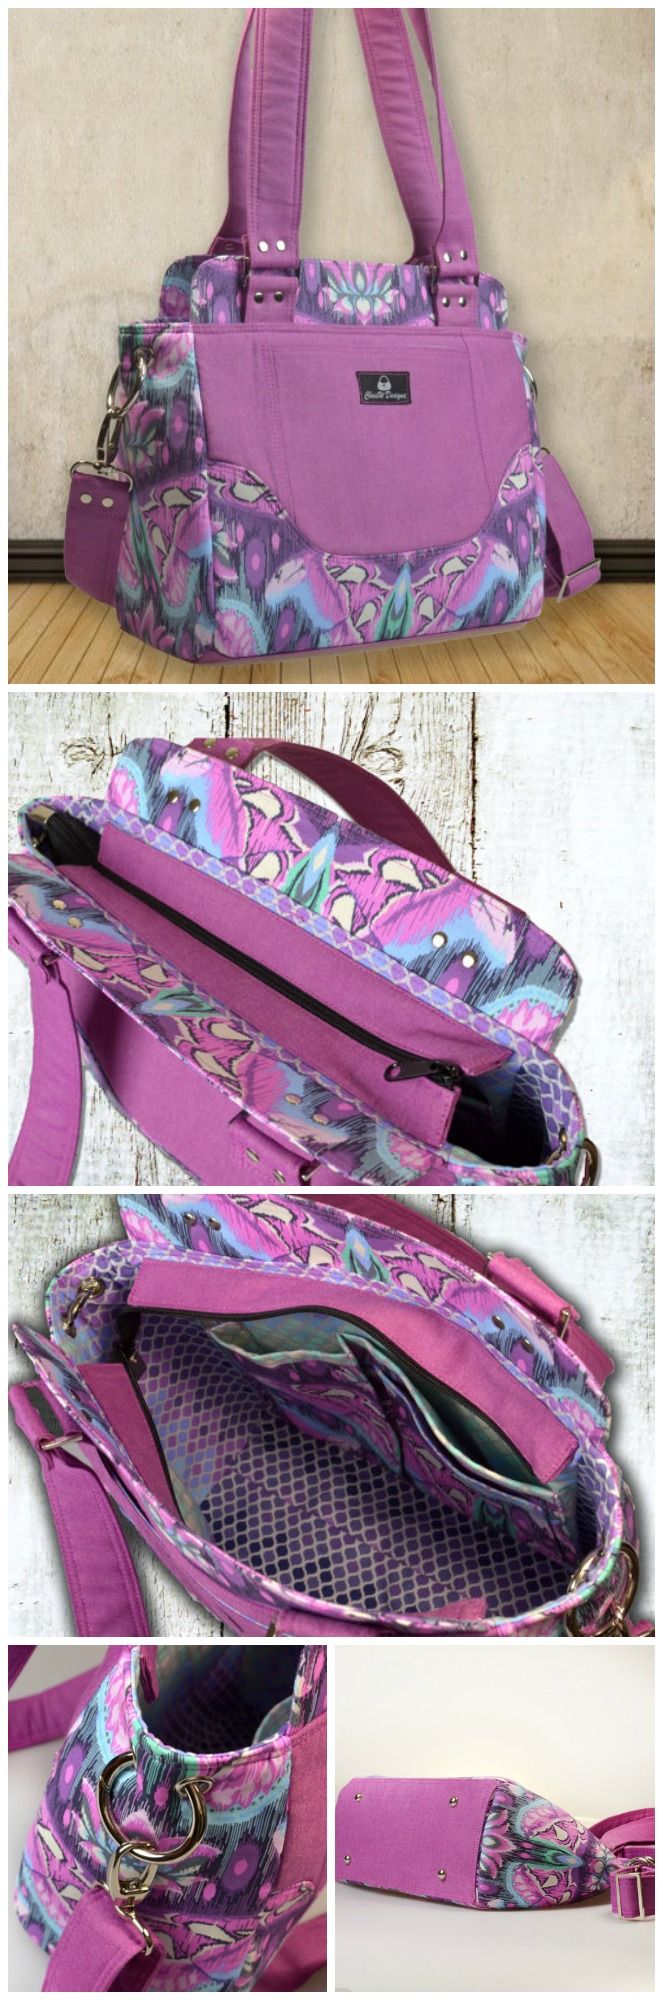 Epiphany Purse sewing pattern. I love all the details on this handbag sewing pat...